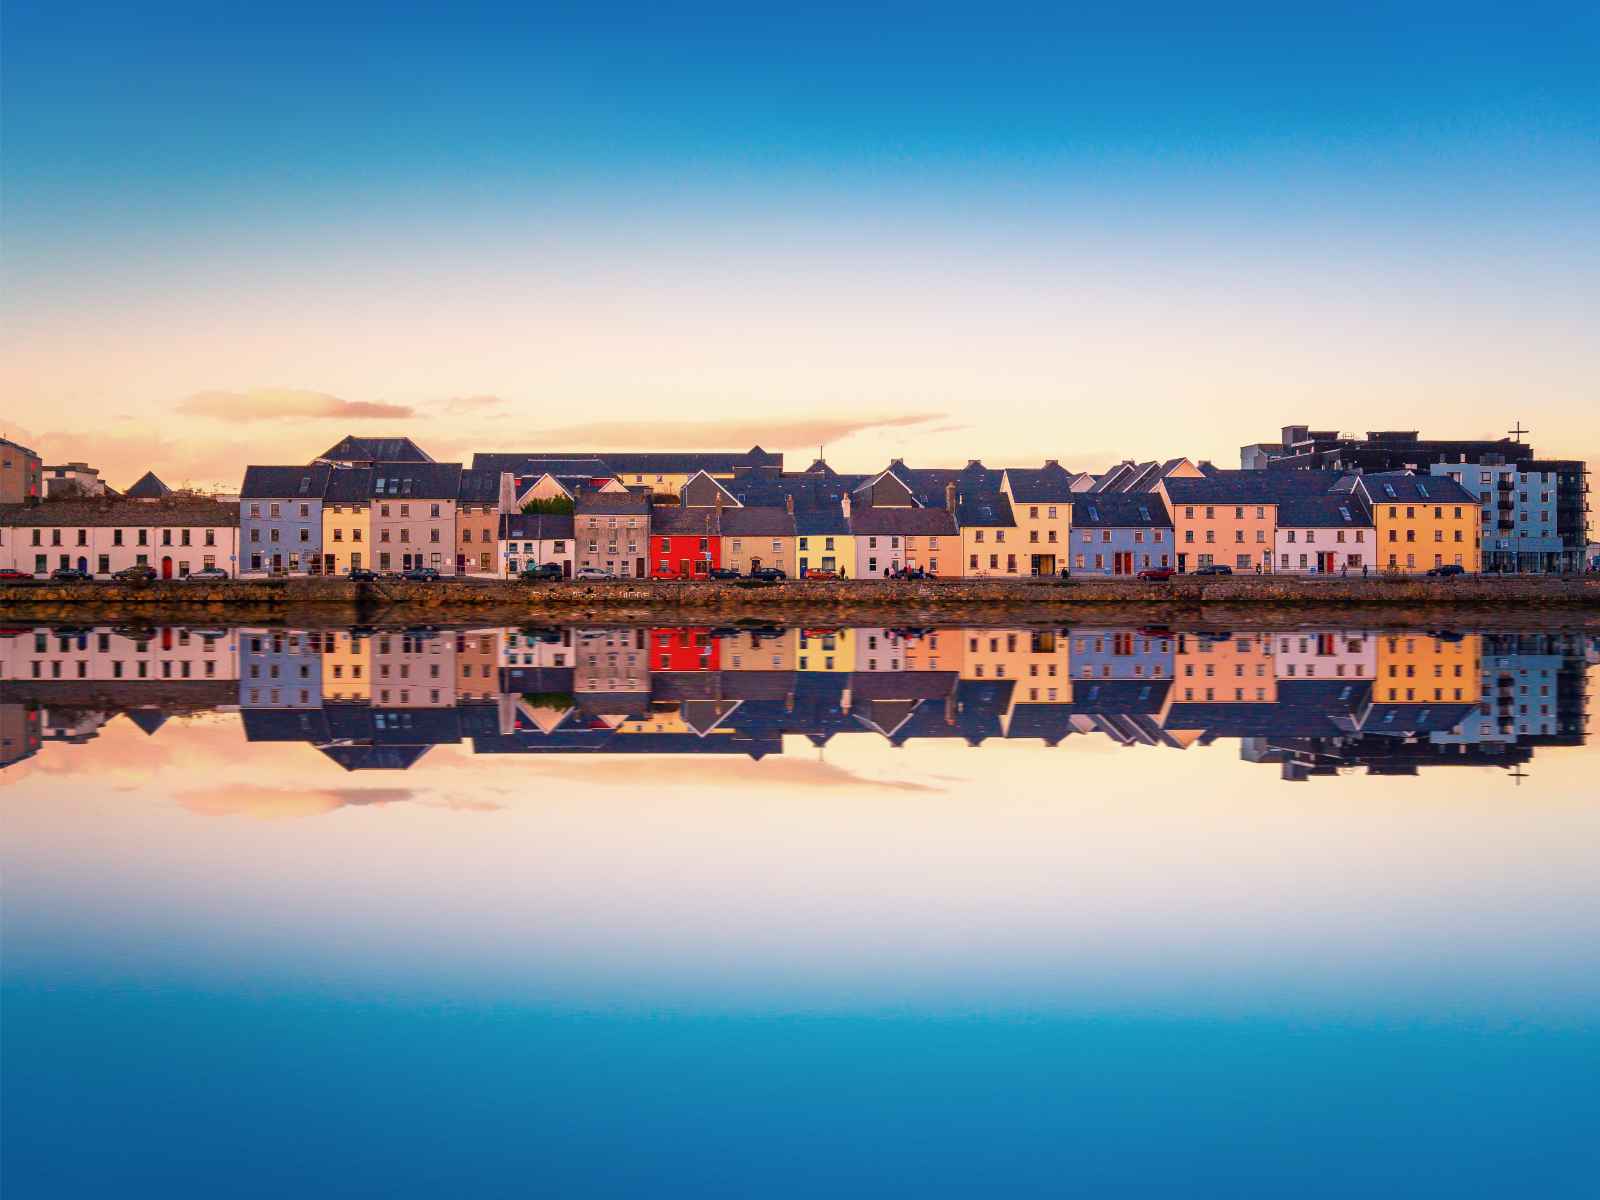 Top things to do in Galway Ireland